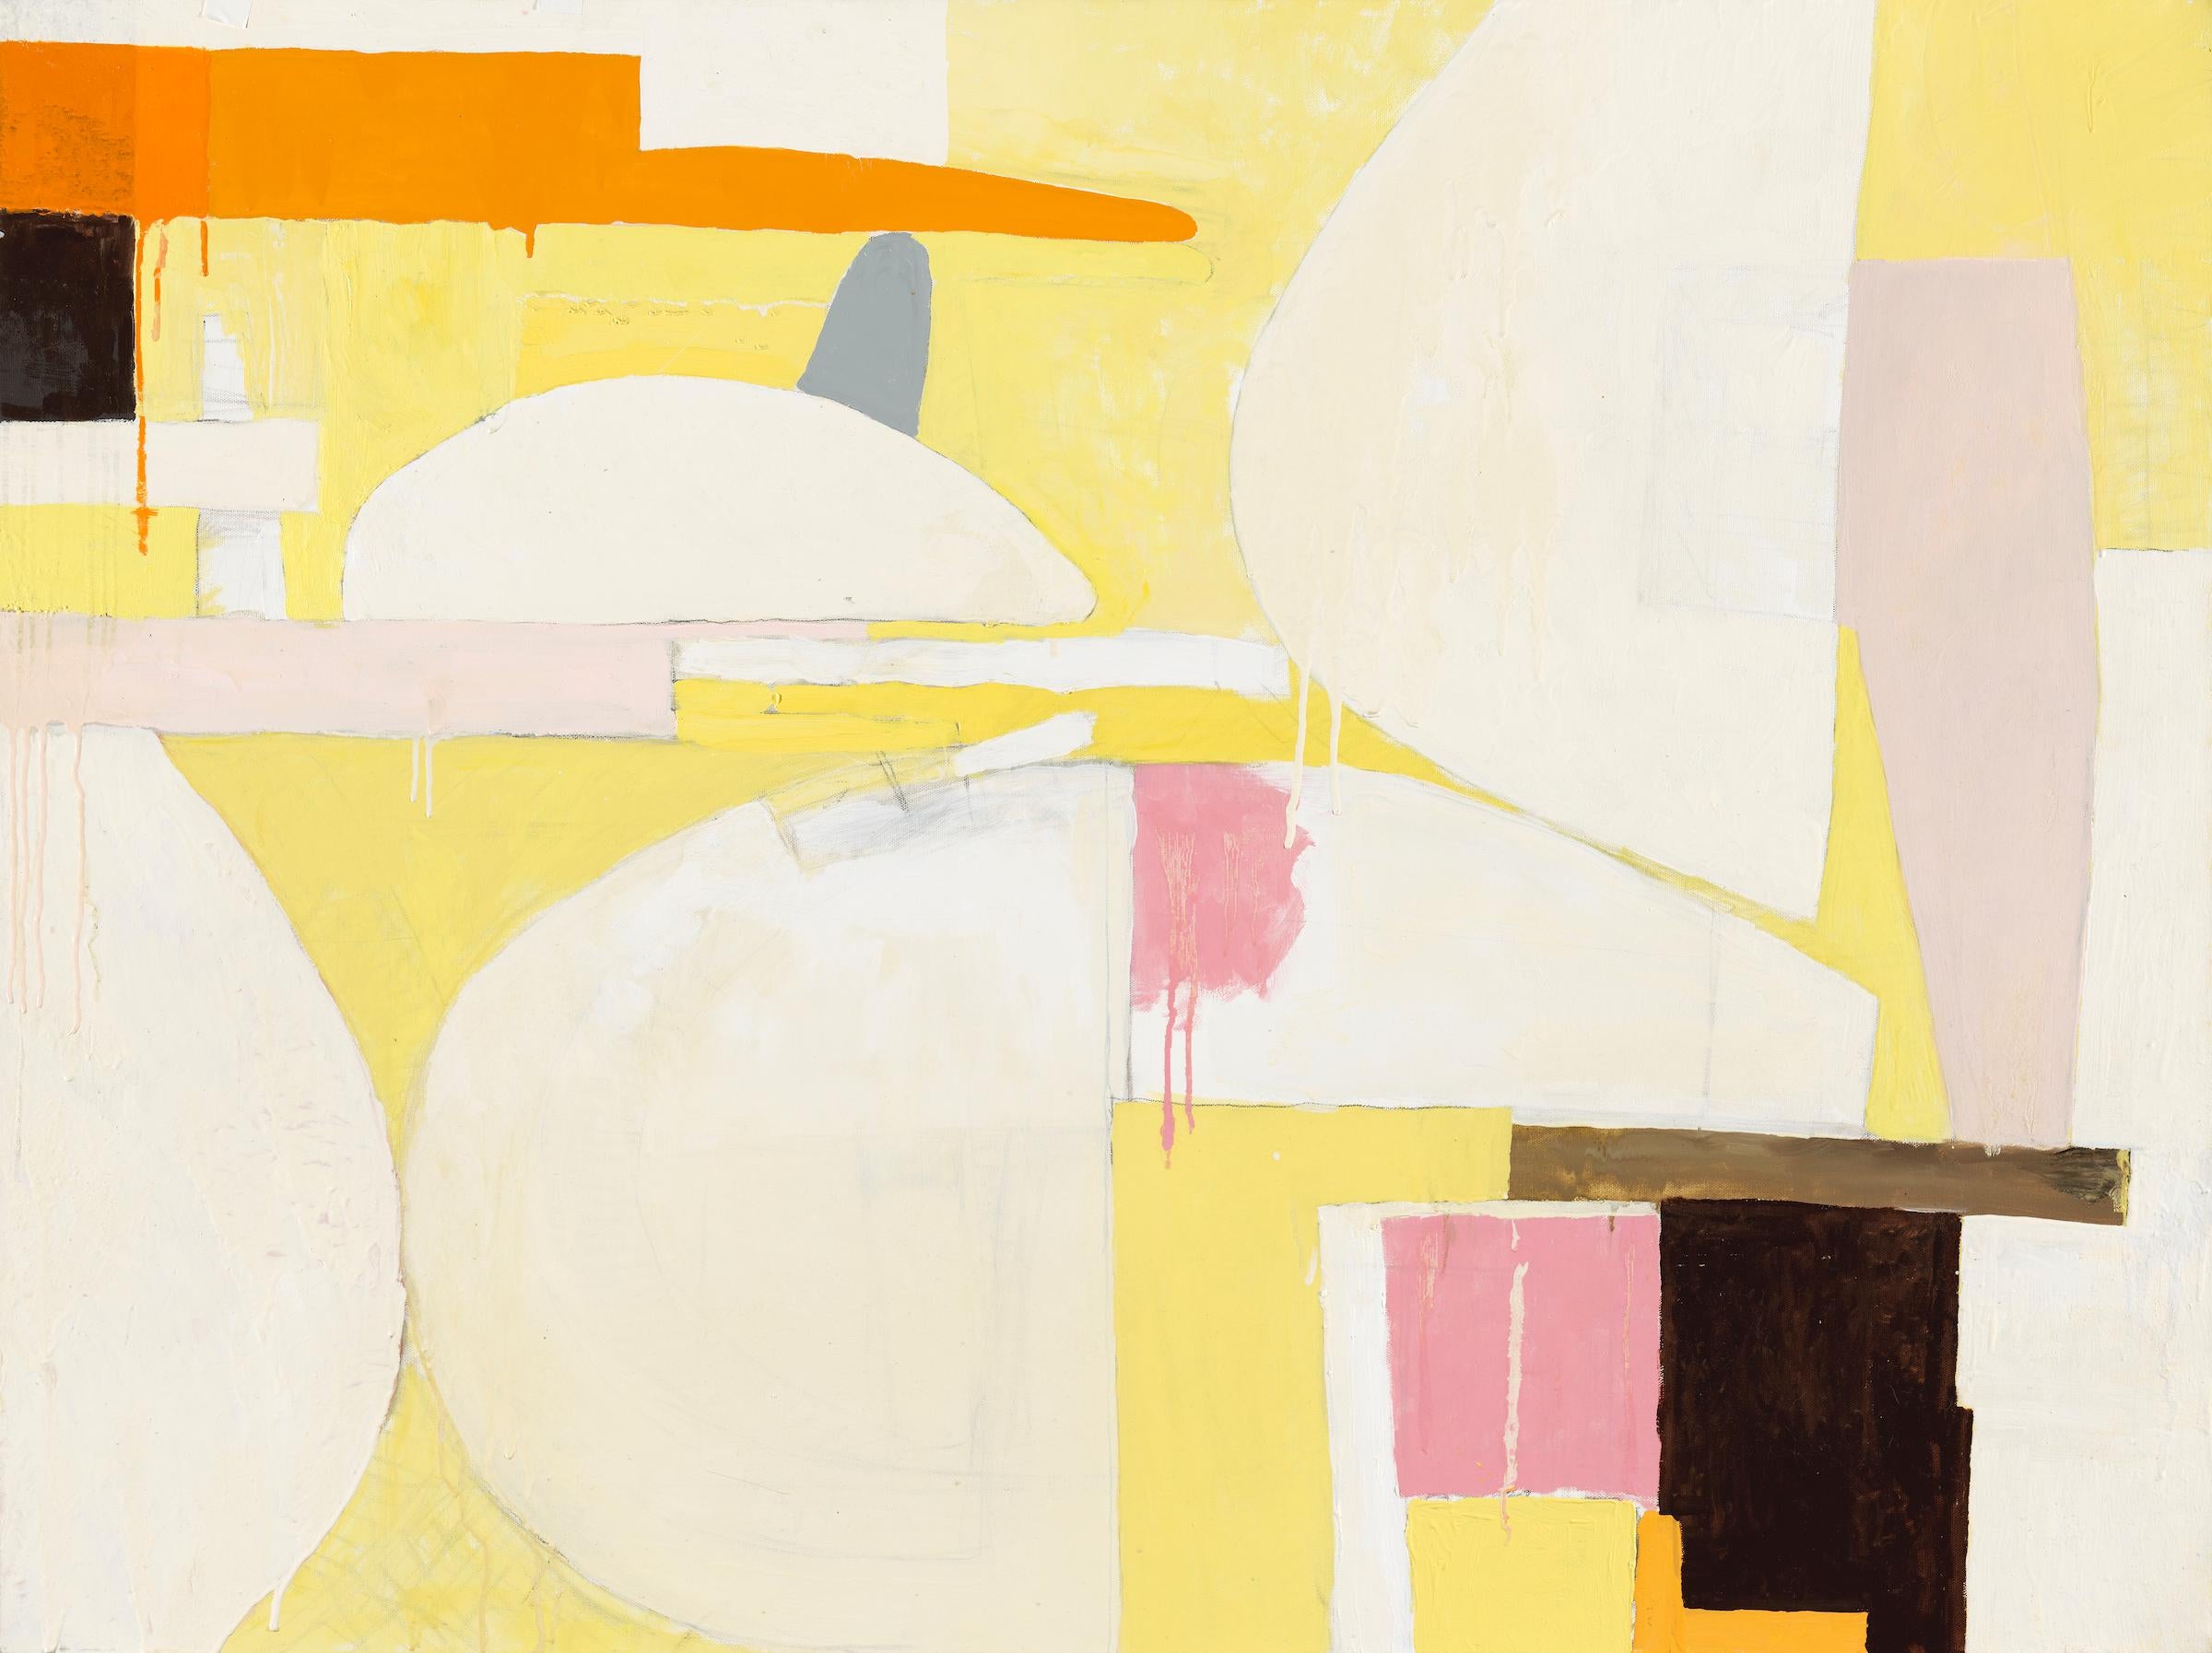 Still Life / abstract expressionistic geometry in soft yellow